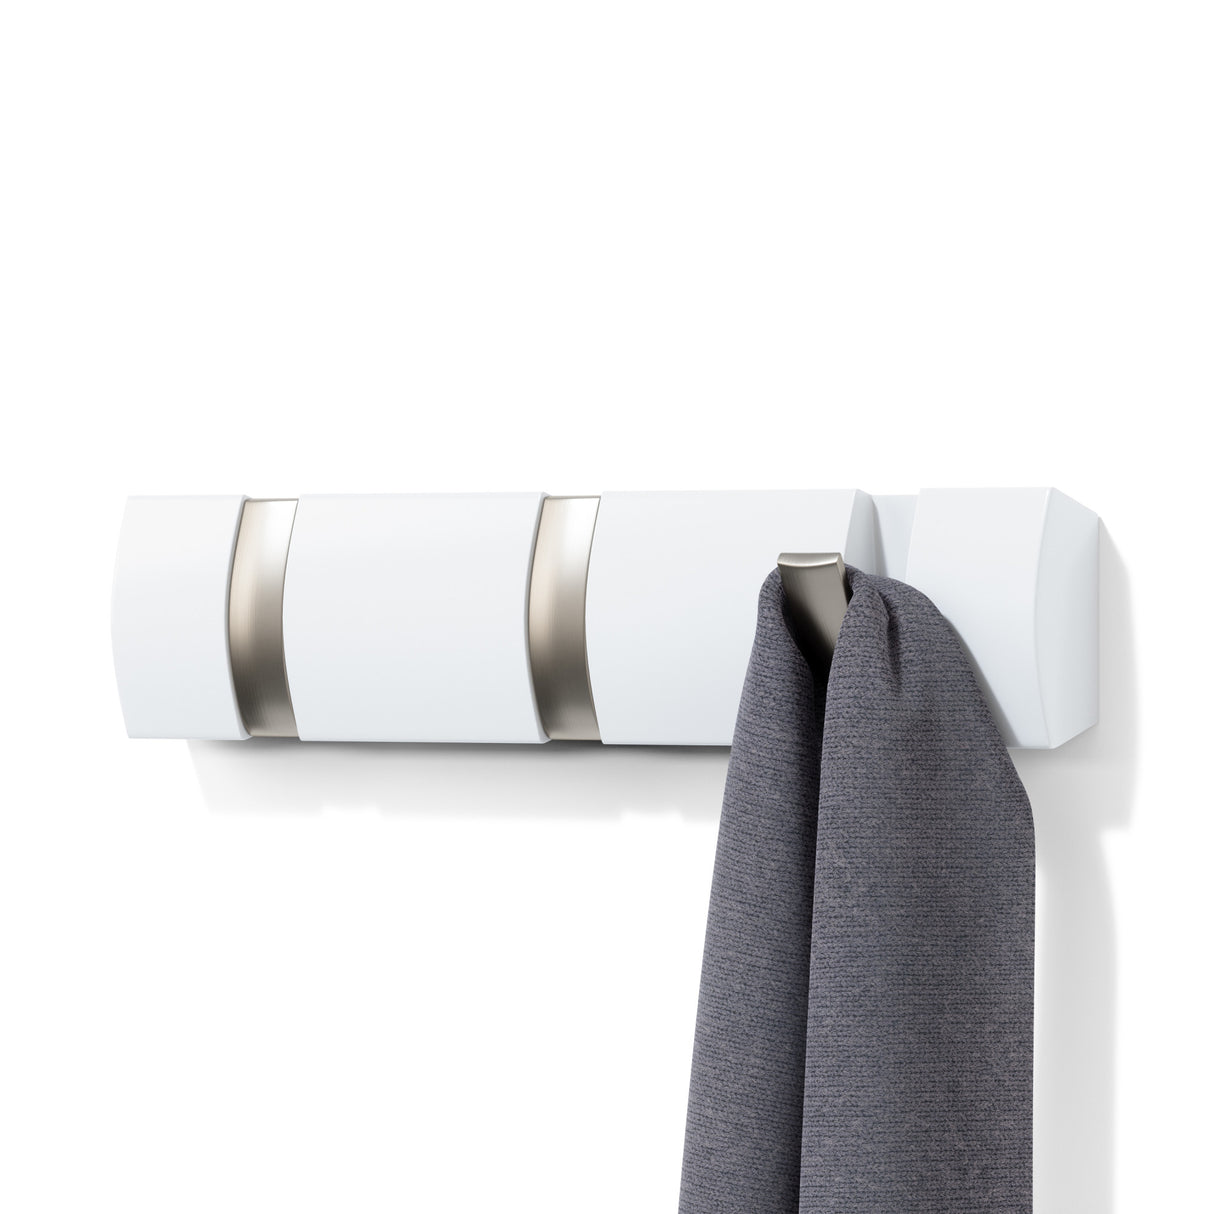 Umbra, White Buddy 4 Decorative Wall Mounted Door Hook for Hanging